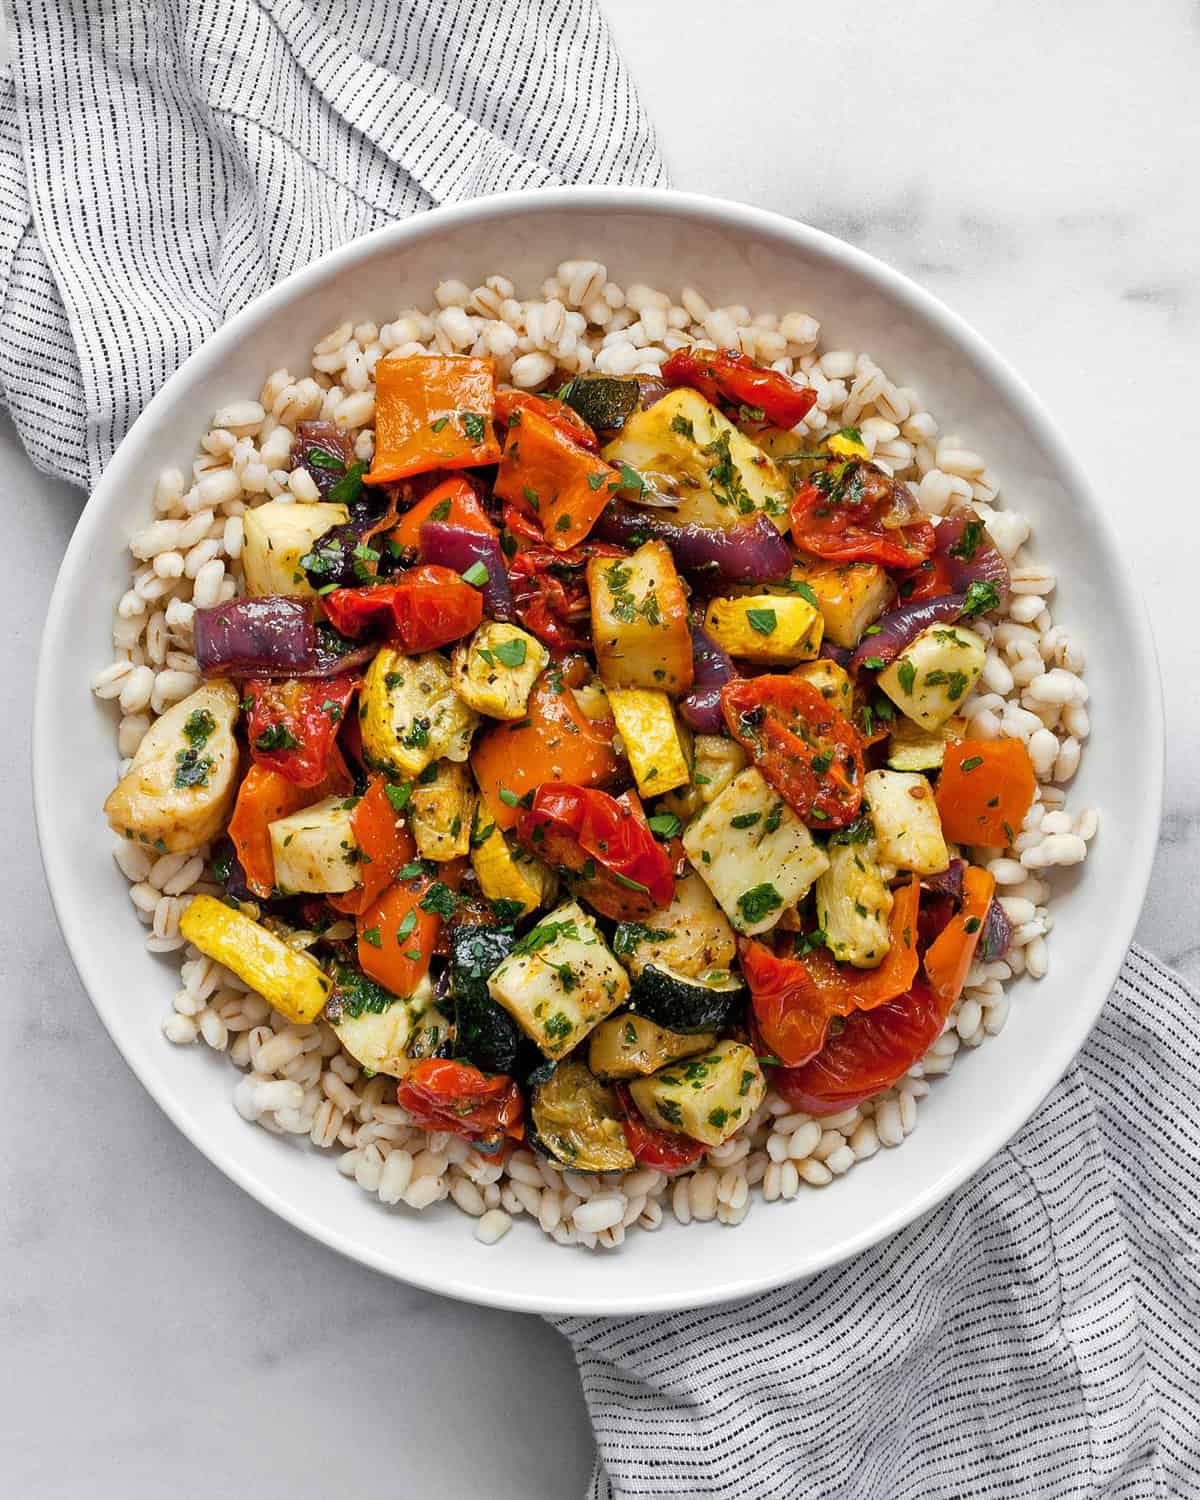 Roasted Mediterranean Vegetables and Halloumi from https://www.lastingredient.com/